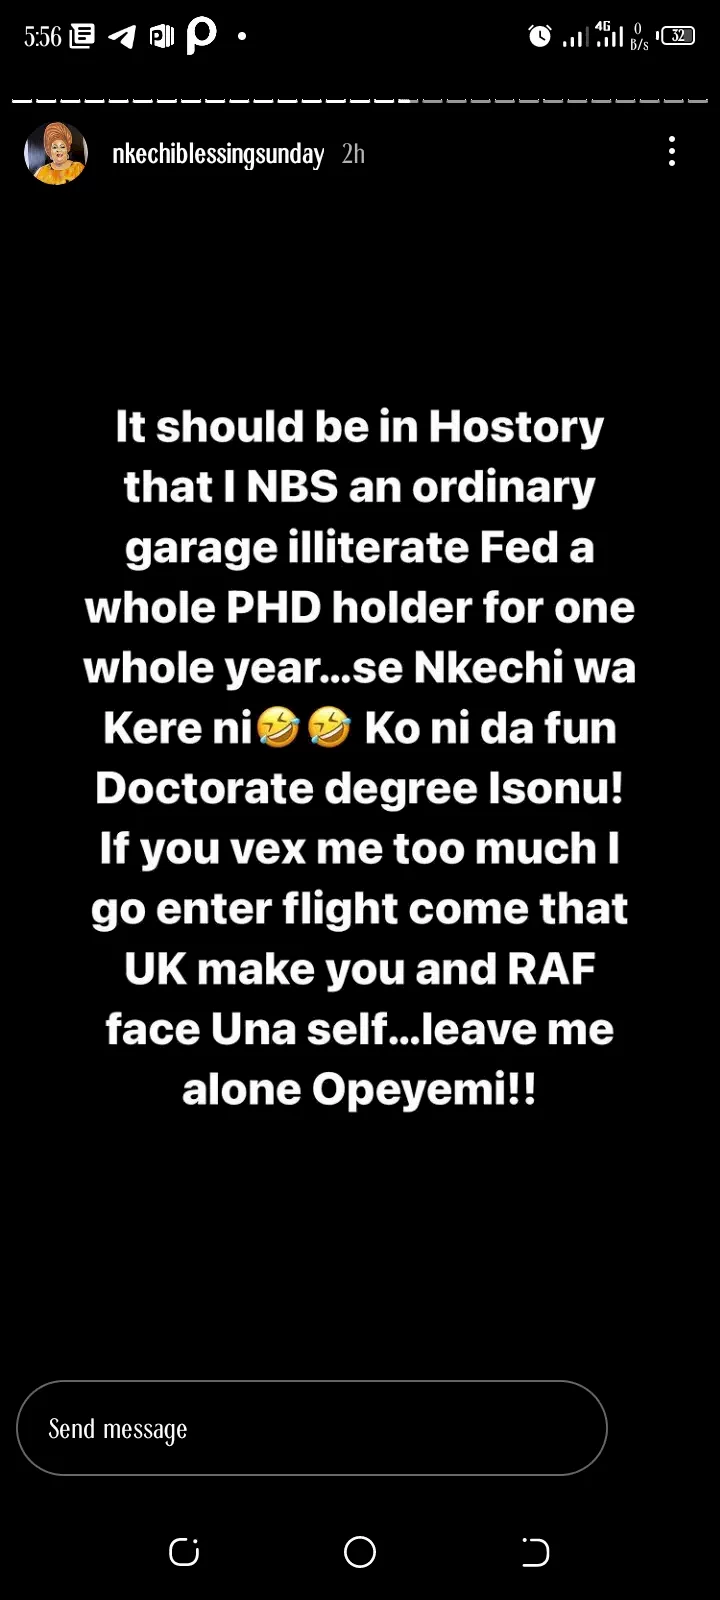 'Phd holder wey illiterate like me dey help type caption' - Nkechi Blessing fires back at ex-lover, Opeyemi Falegan